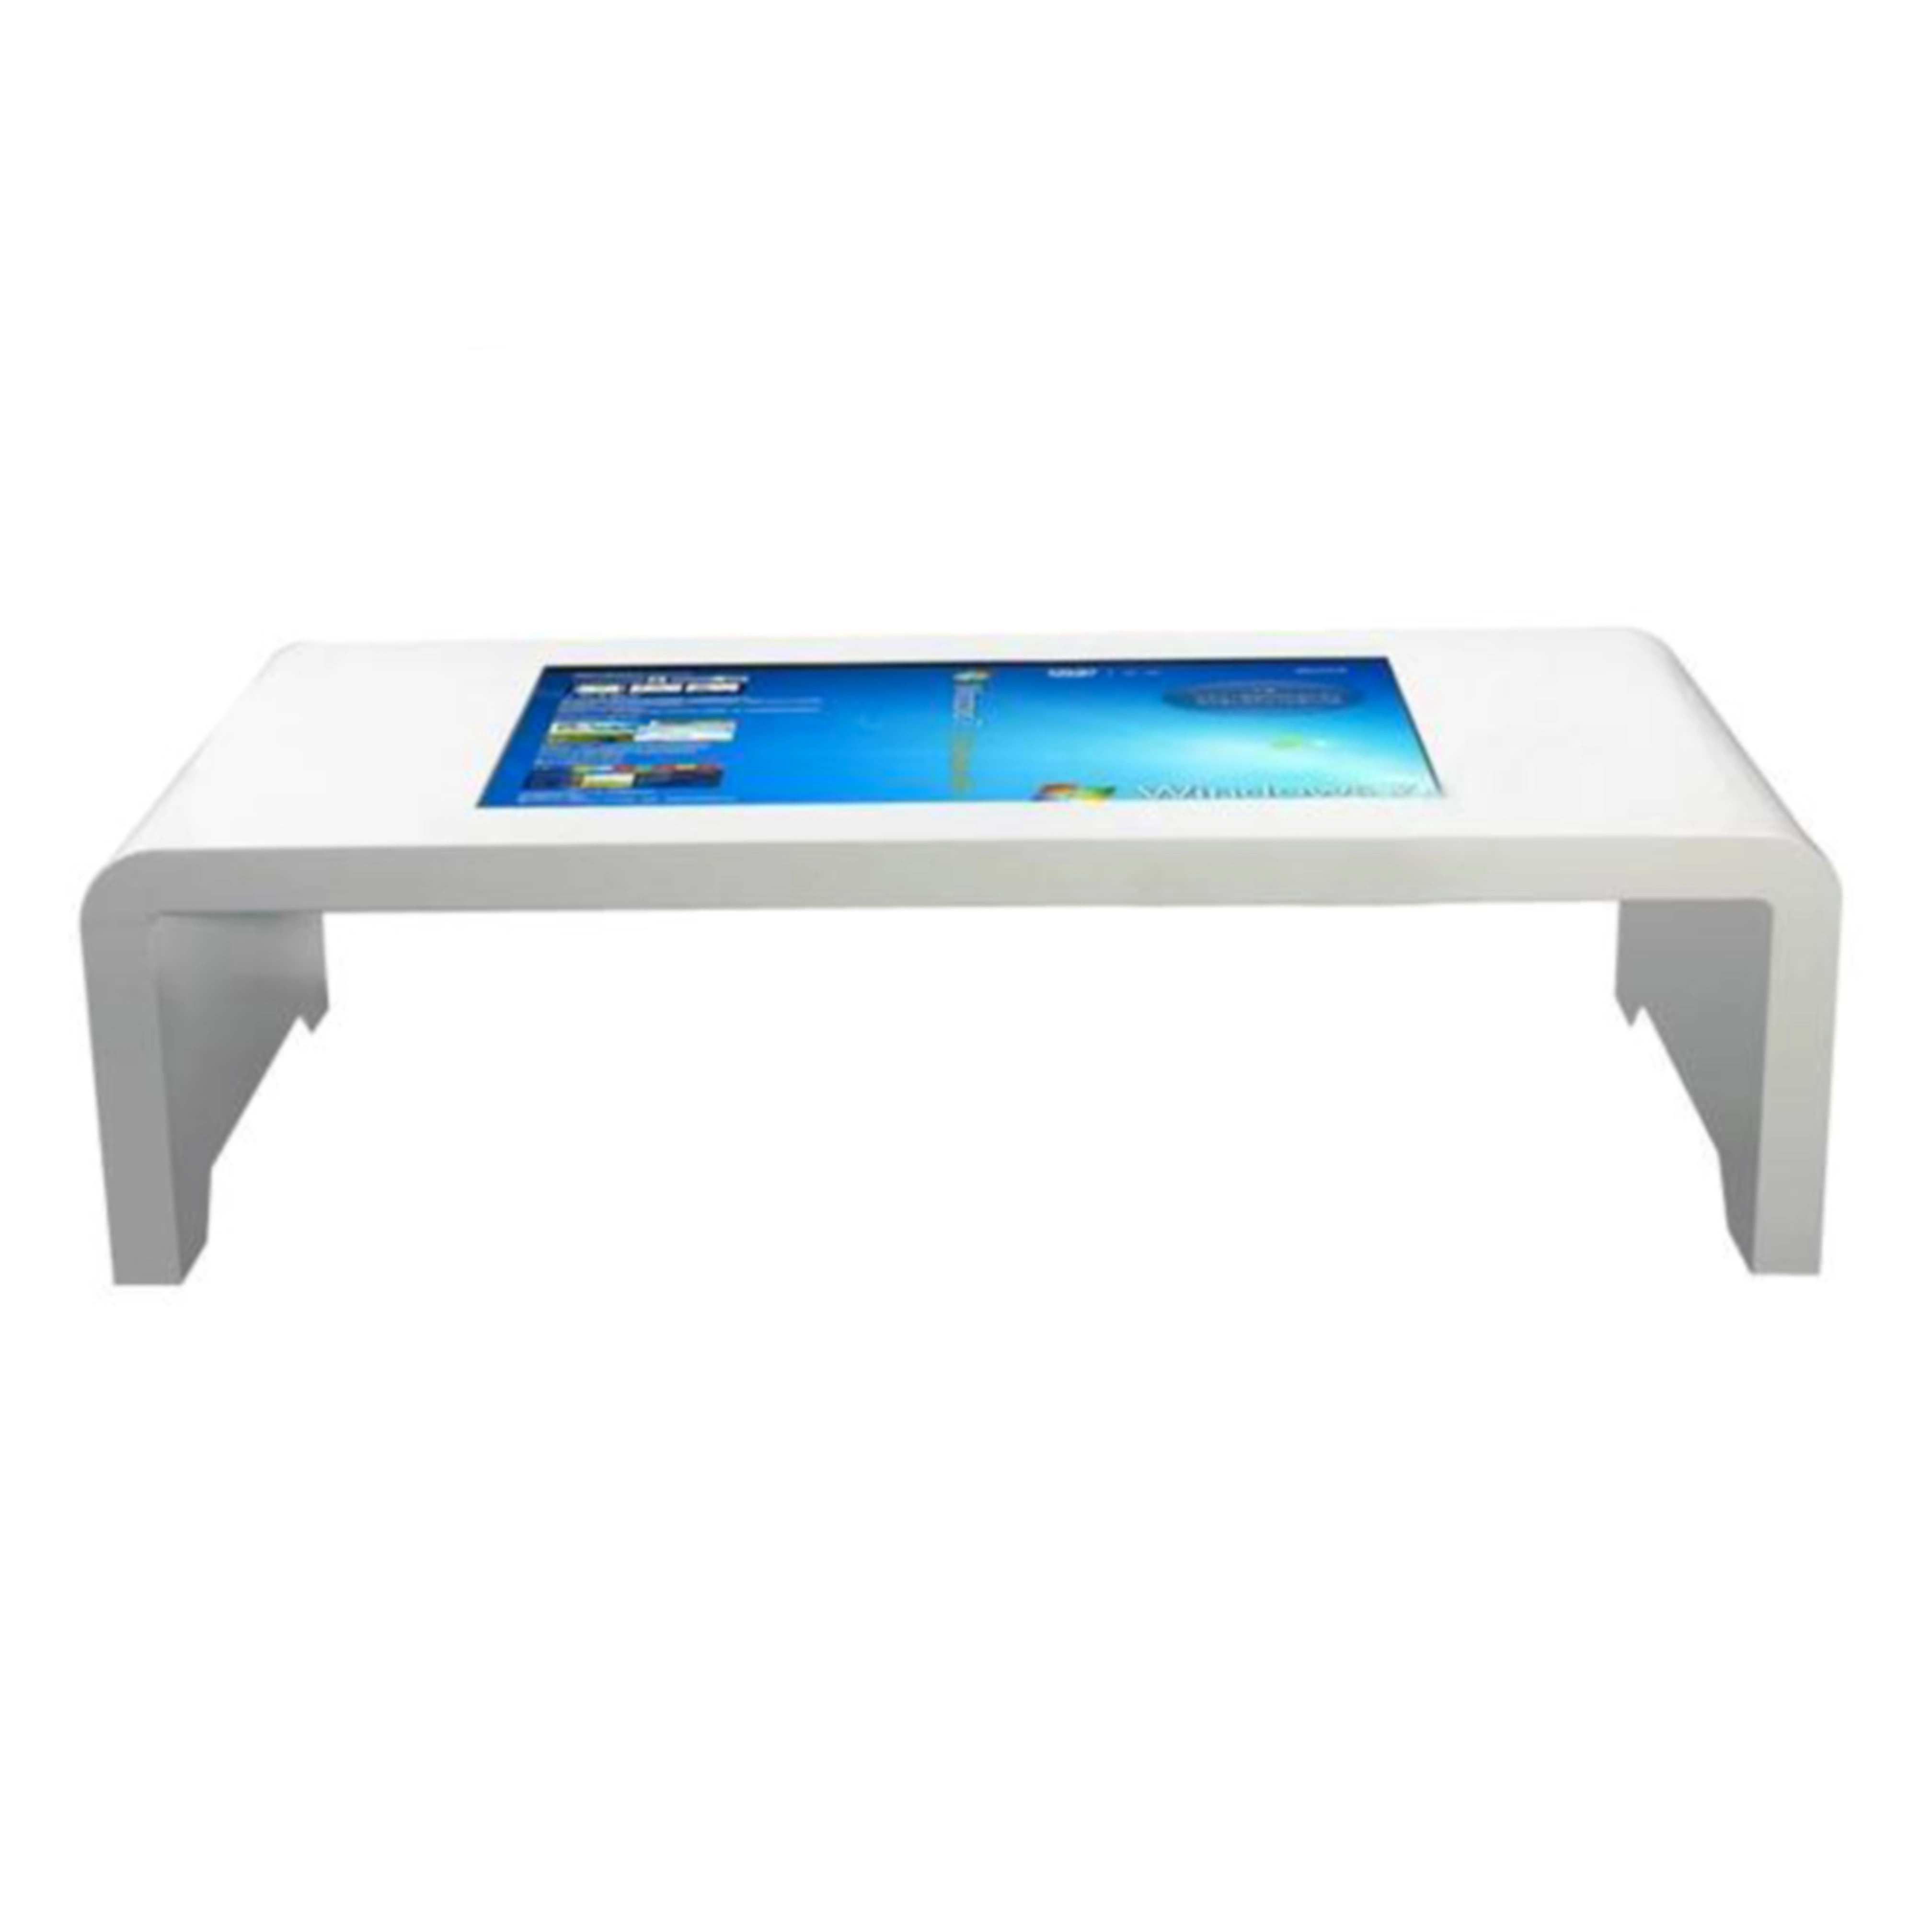 Interactive Multi-Touch Interactive Flat Table for Conference Education Discussion Board Game Display